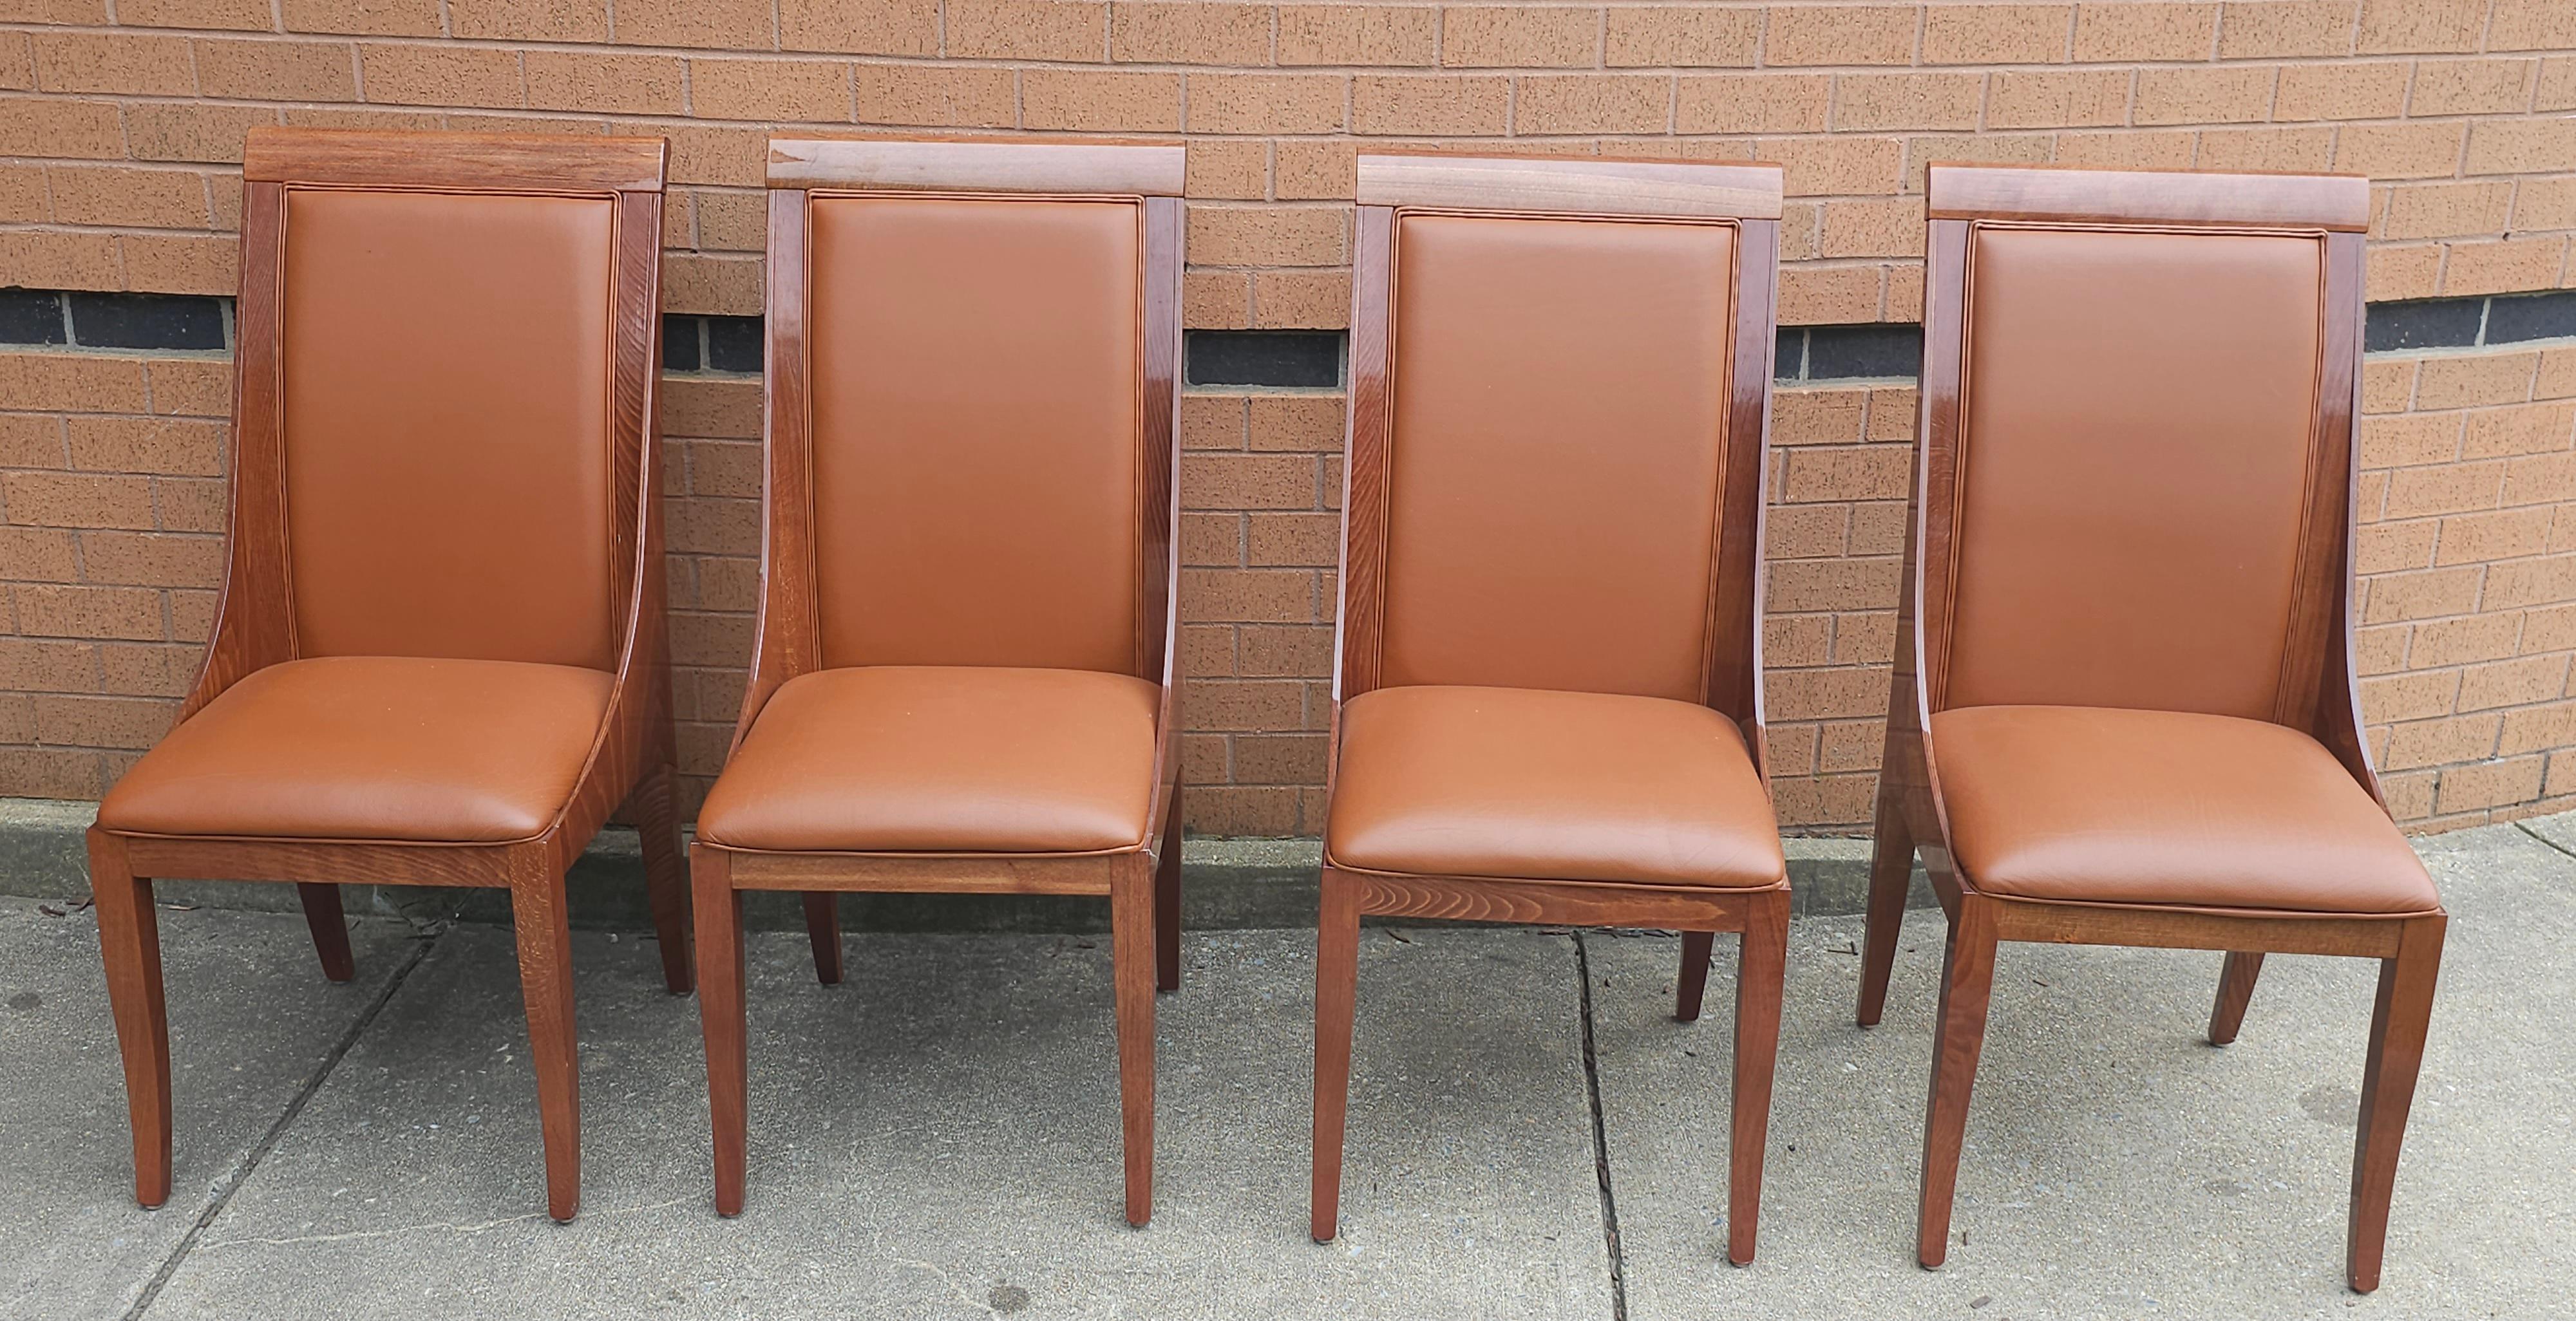 A beautiful Set of Four Constantini Pietro glossy finish Rosewood and soft, top grain Leather Upholstered Dining Chairs in great condition. Measure 19